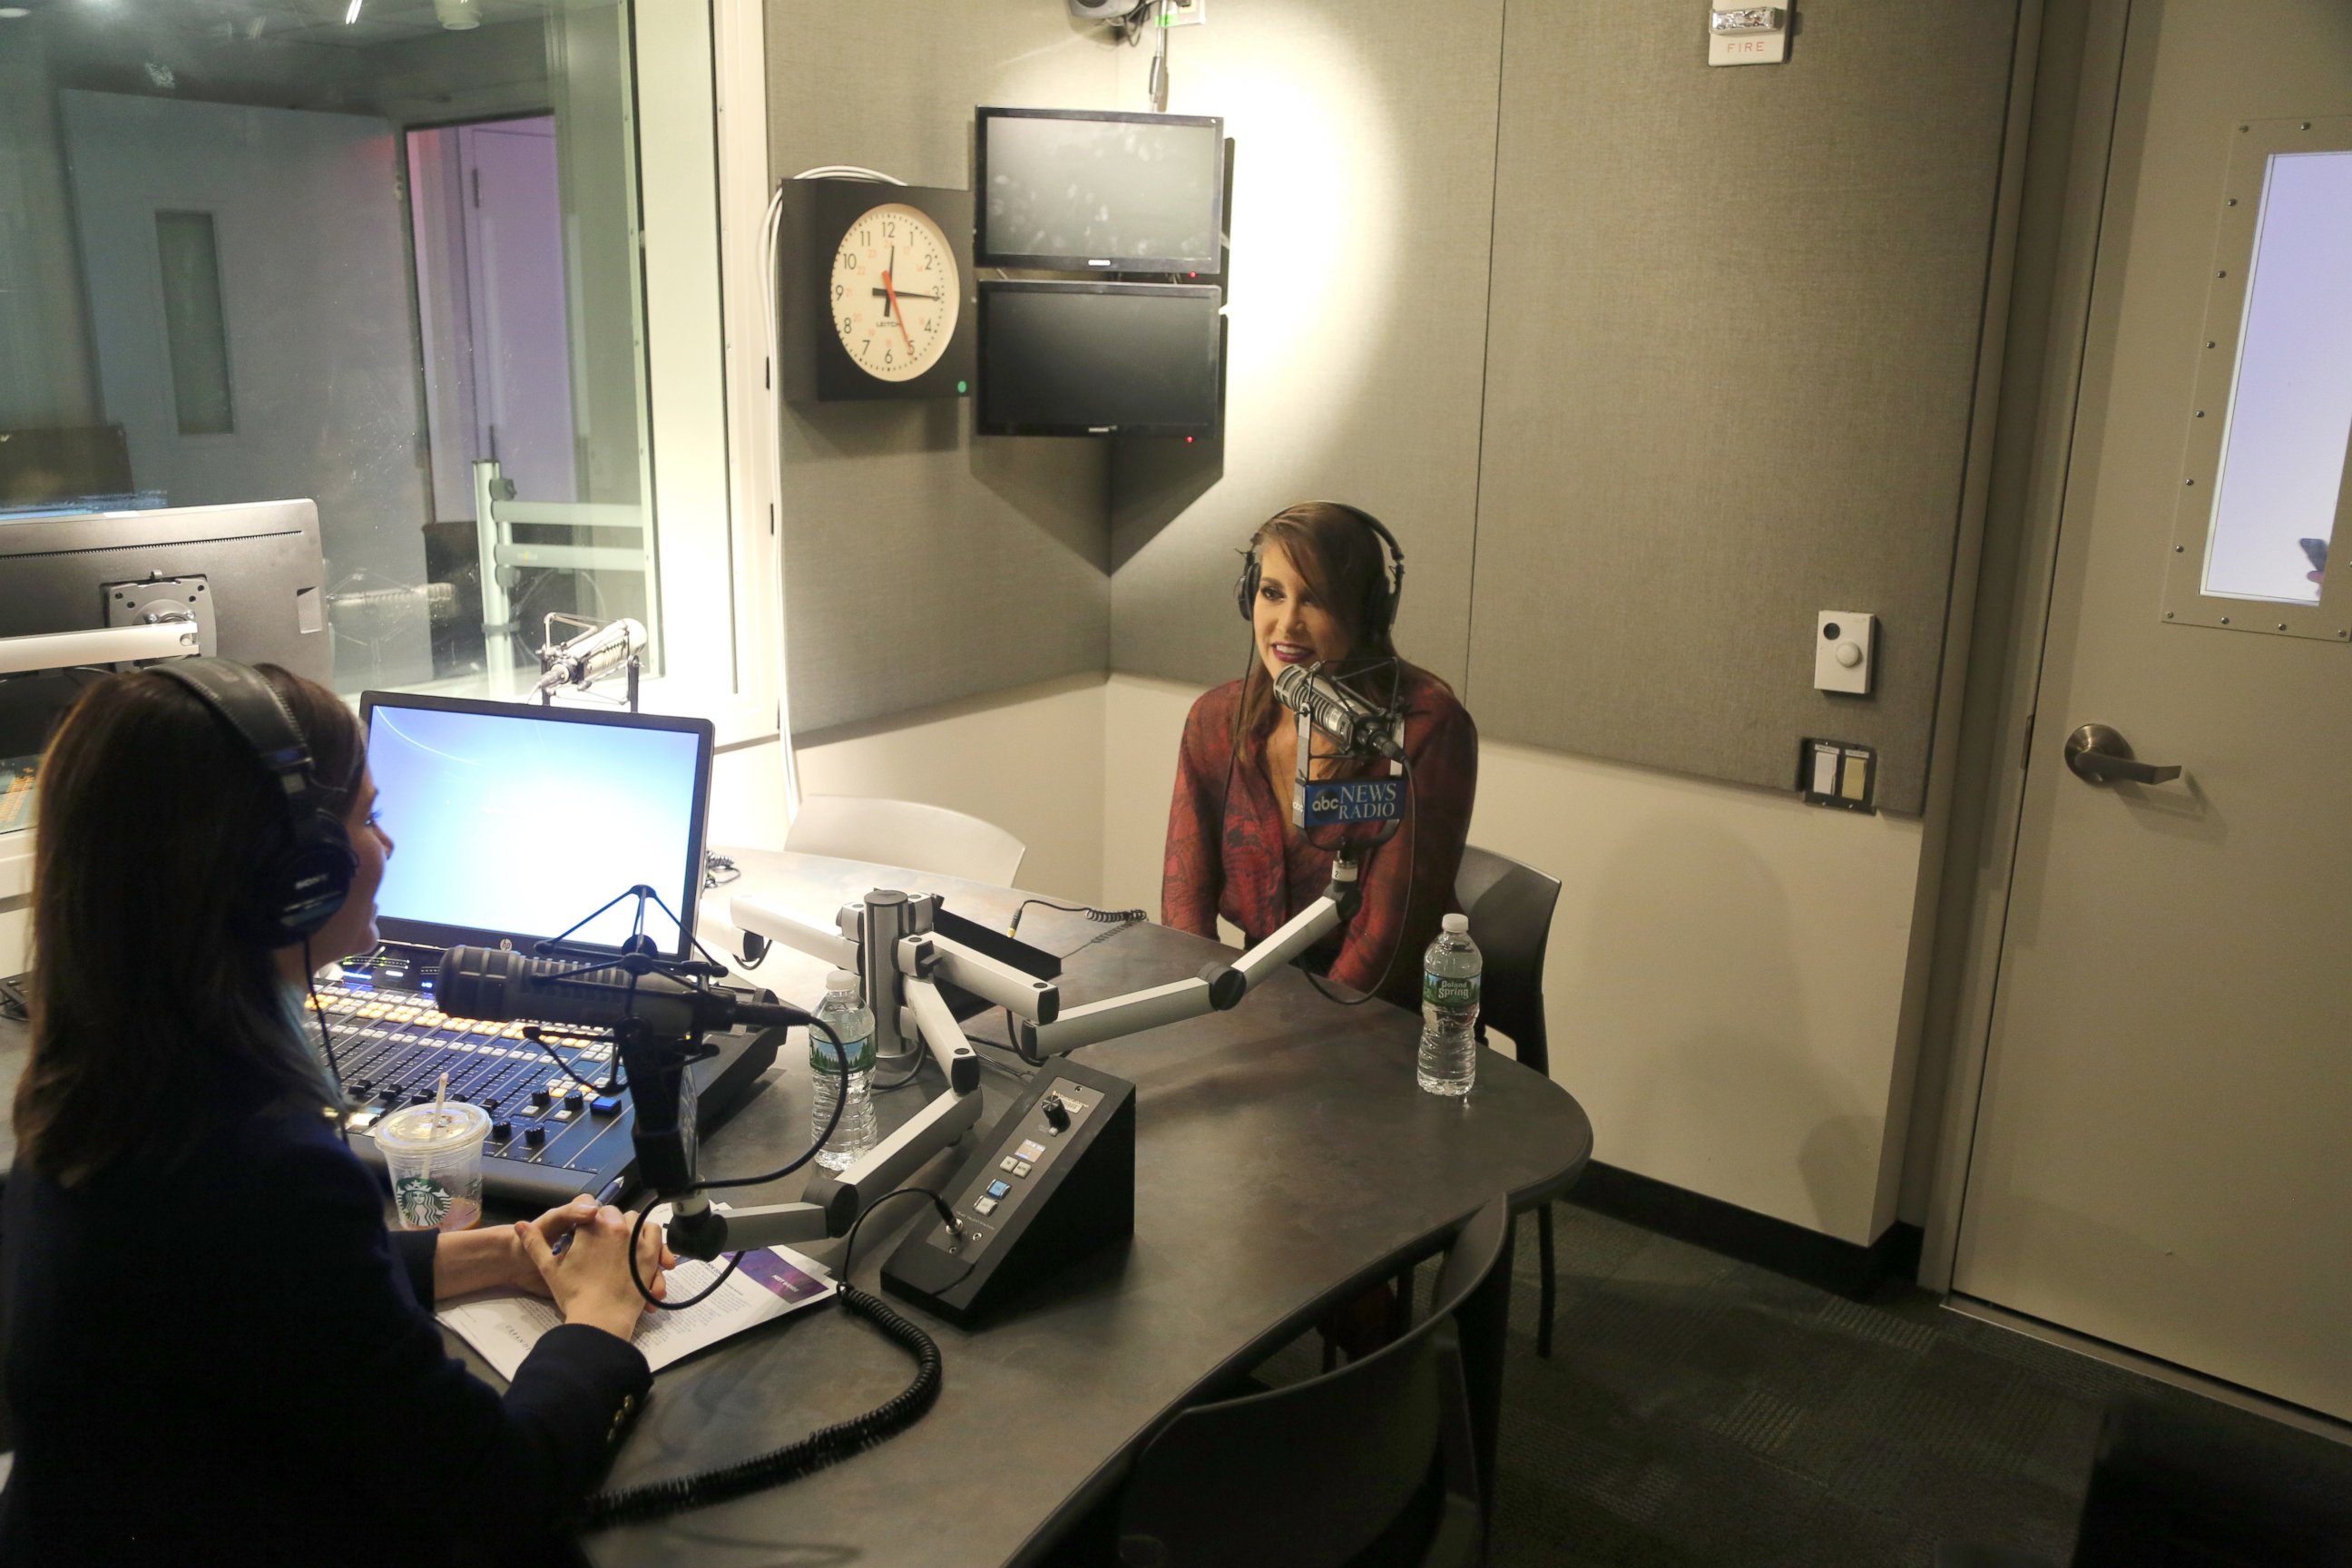 PHOTO: Urban Decay Founder Wende Zomnir joins ABC News' Chief Business, Technology and Economics Correspondent, Rebecca Jarvis on her podcast "No Limits with Rebecca Jarvis."